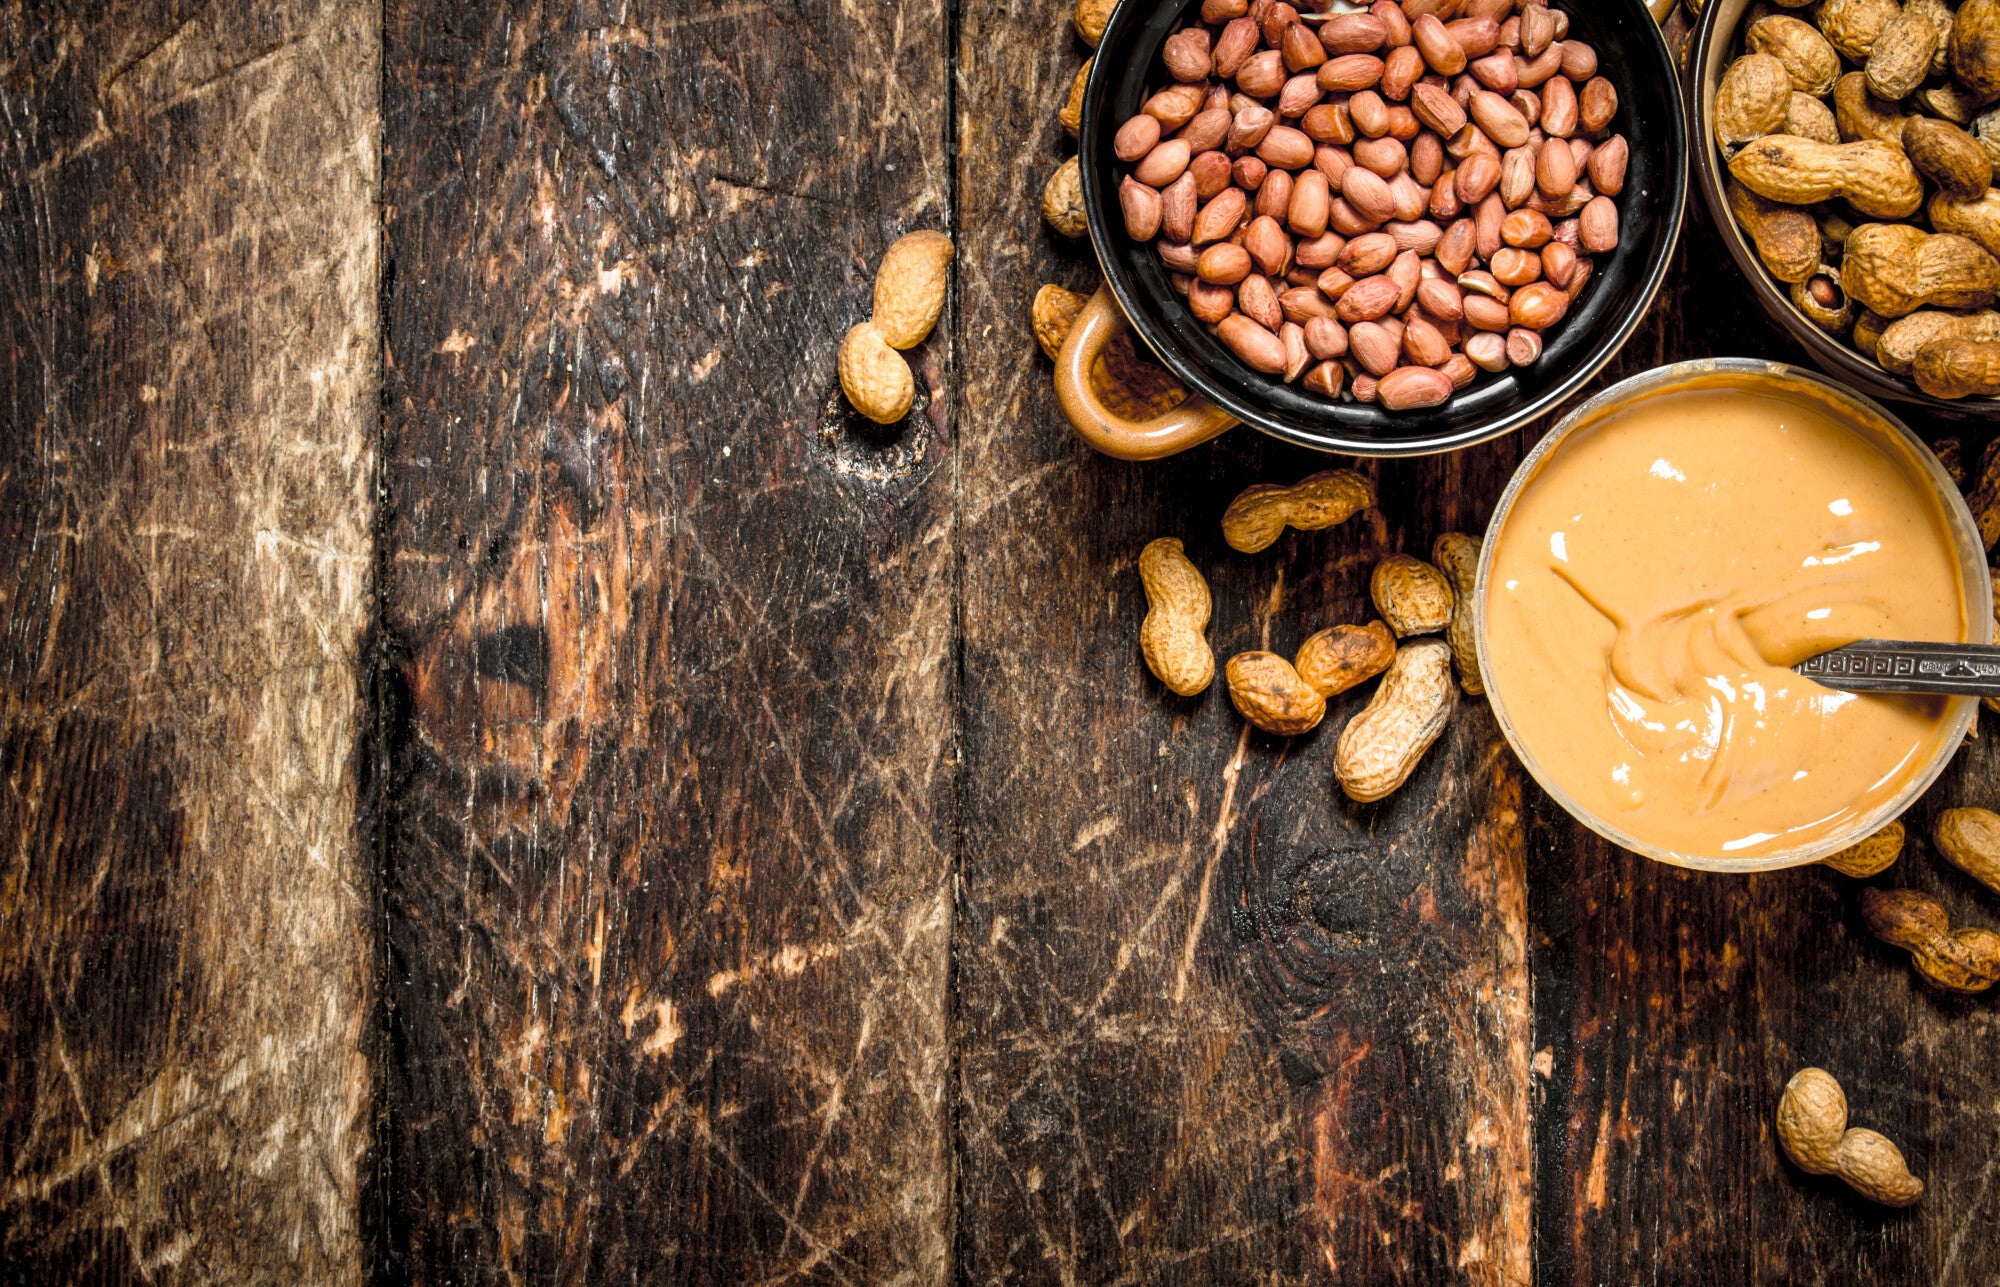 Nut Butter: Which Is the Healthiest for You?